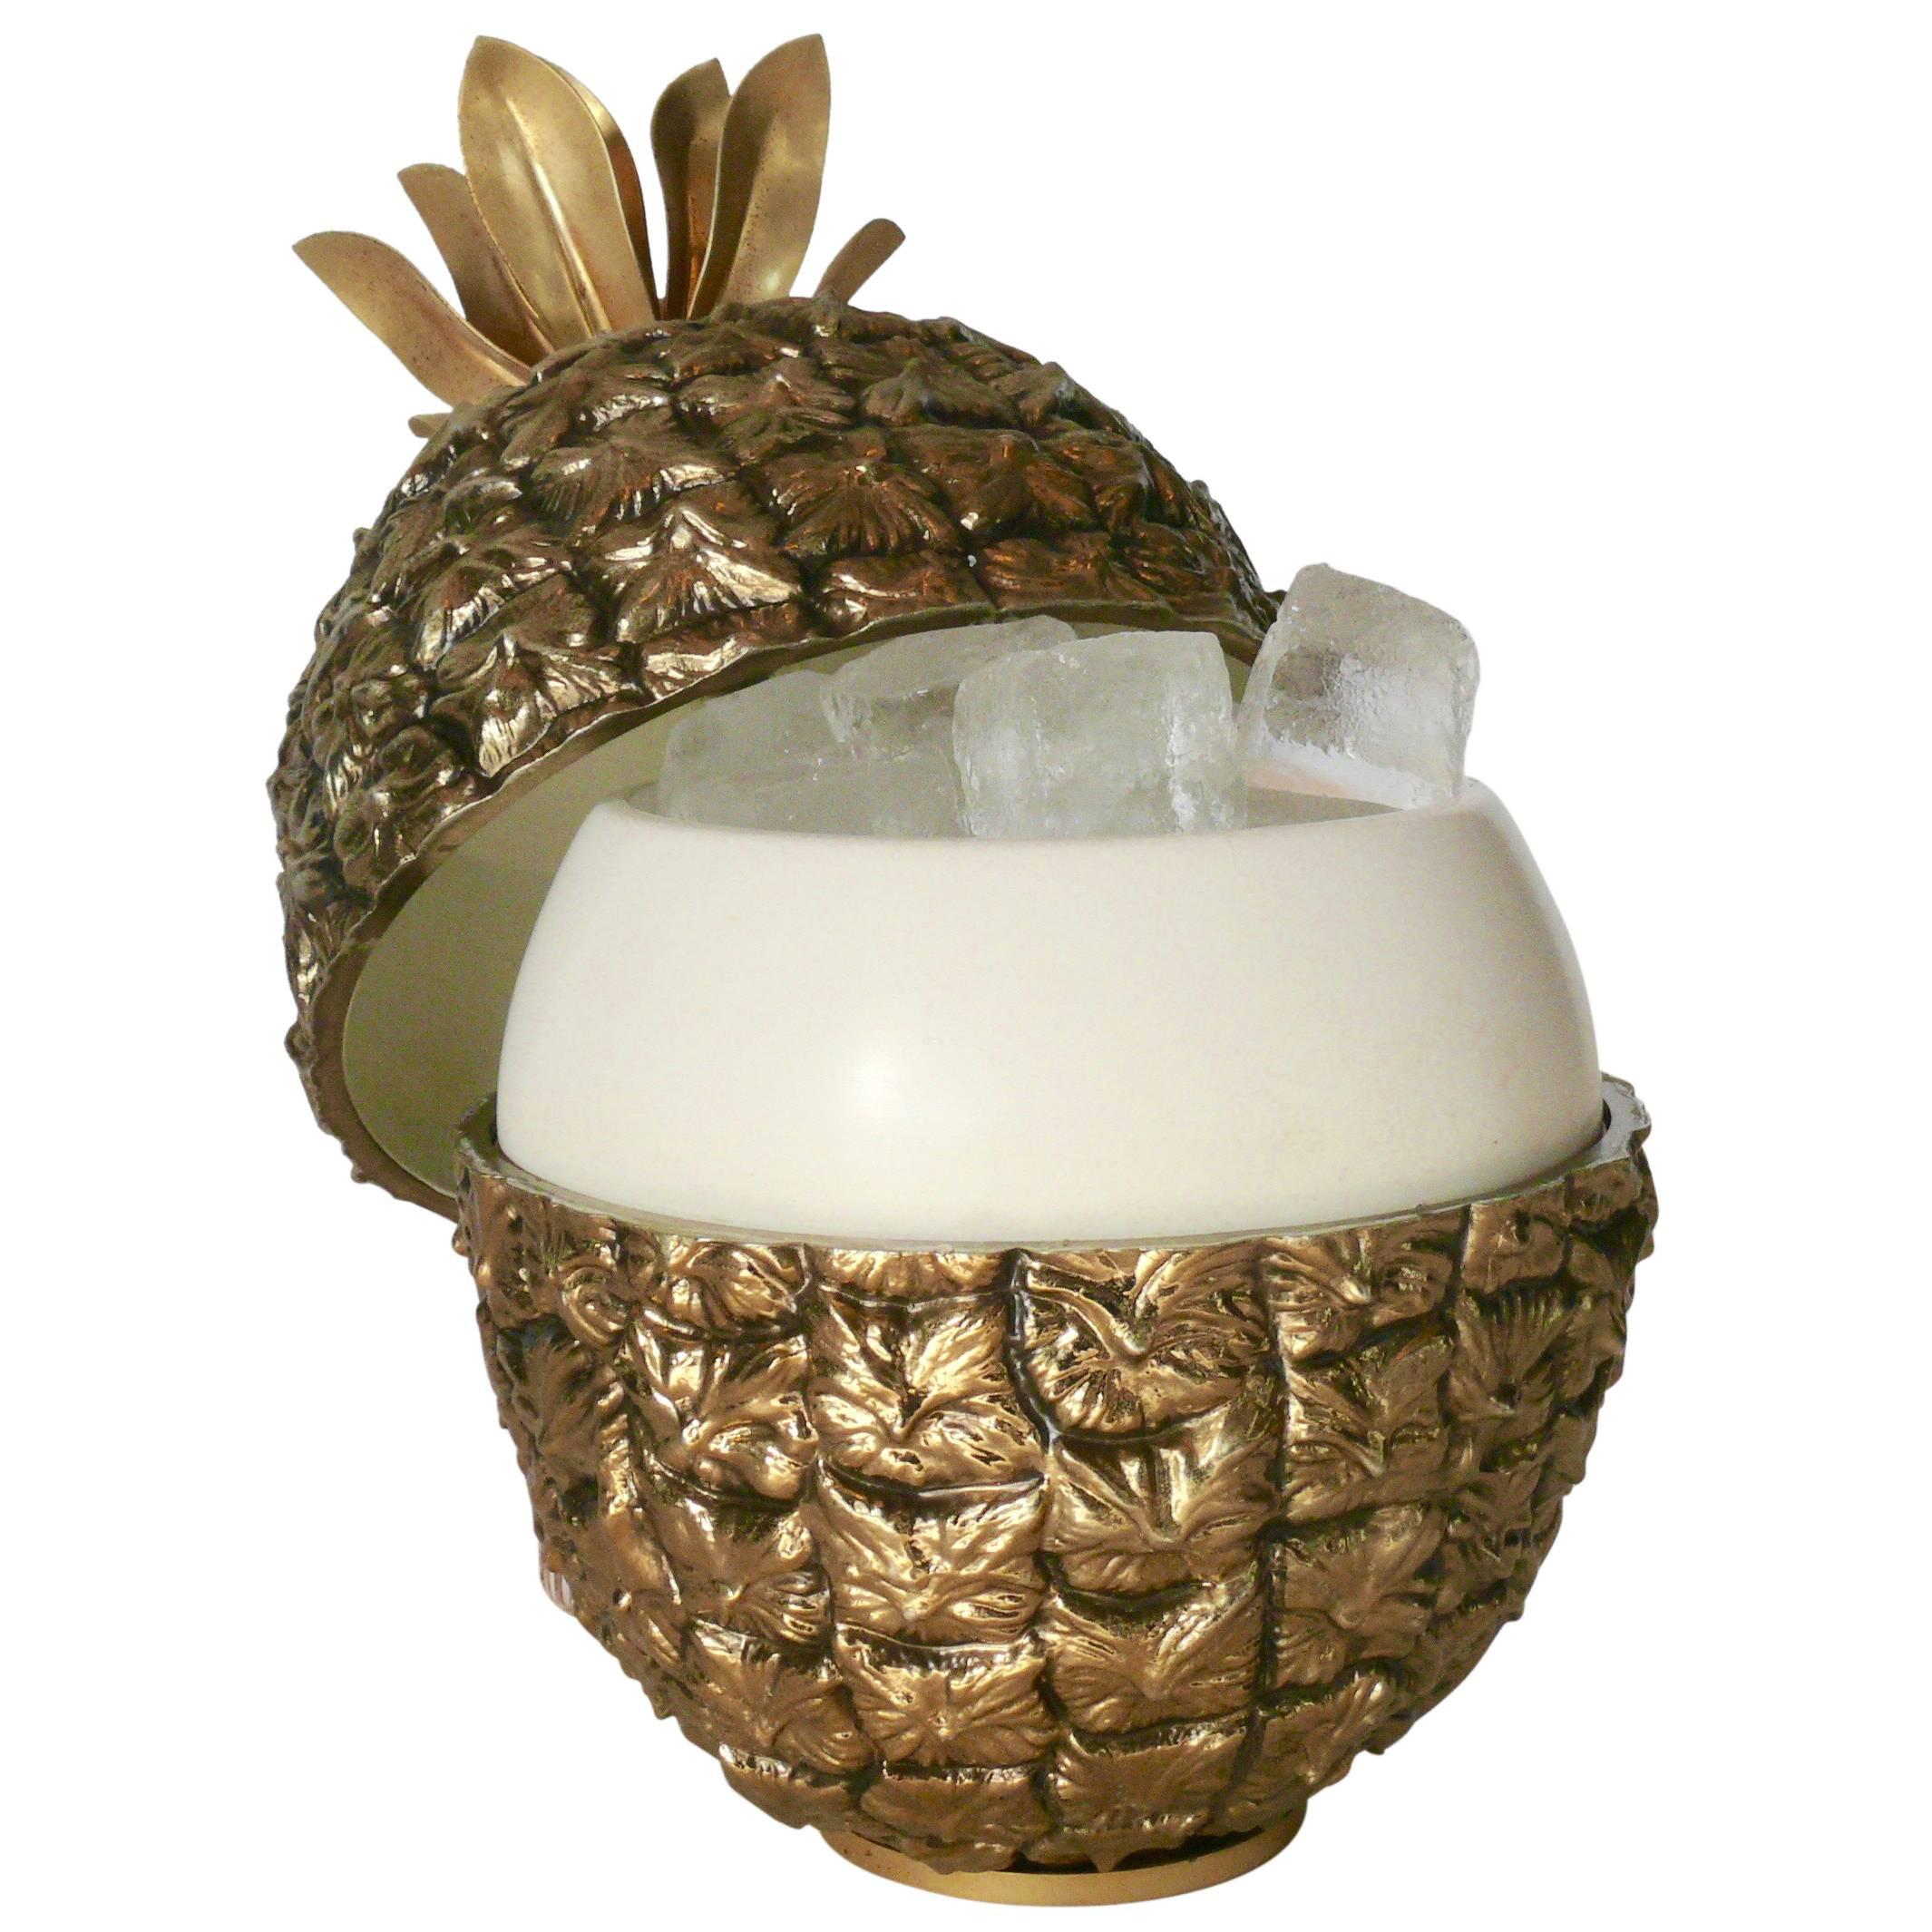 Wonderful brass plated pineapple shaped ice bucket by Michel Datois, Paris, 1970s. Constructed of of brass plated plastic, solid metal base stamped with 'Made in Paris', and adorned with beautiful metal leaves on top that serve as a handle.